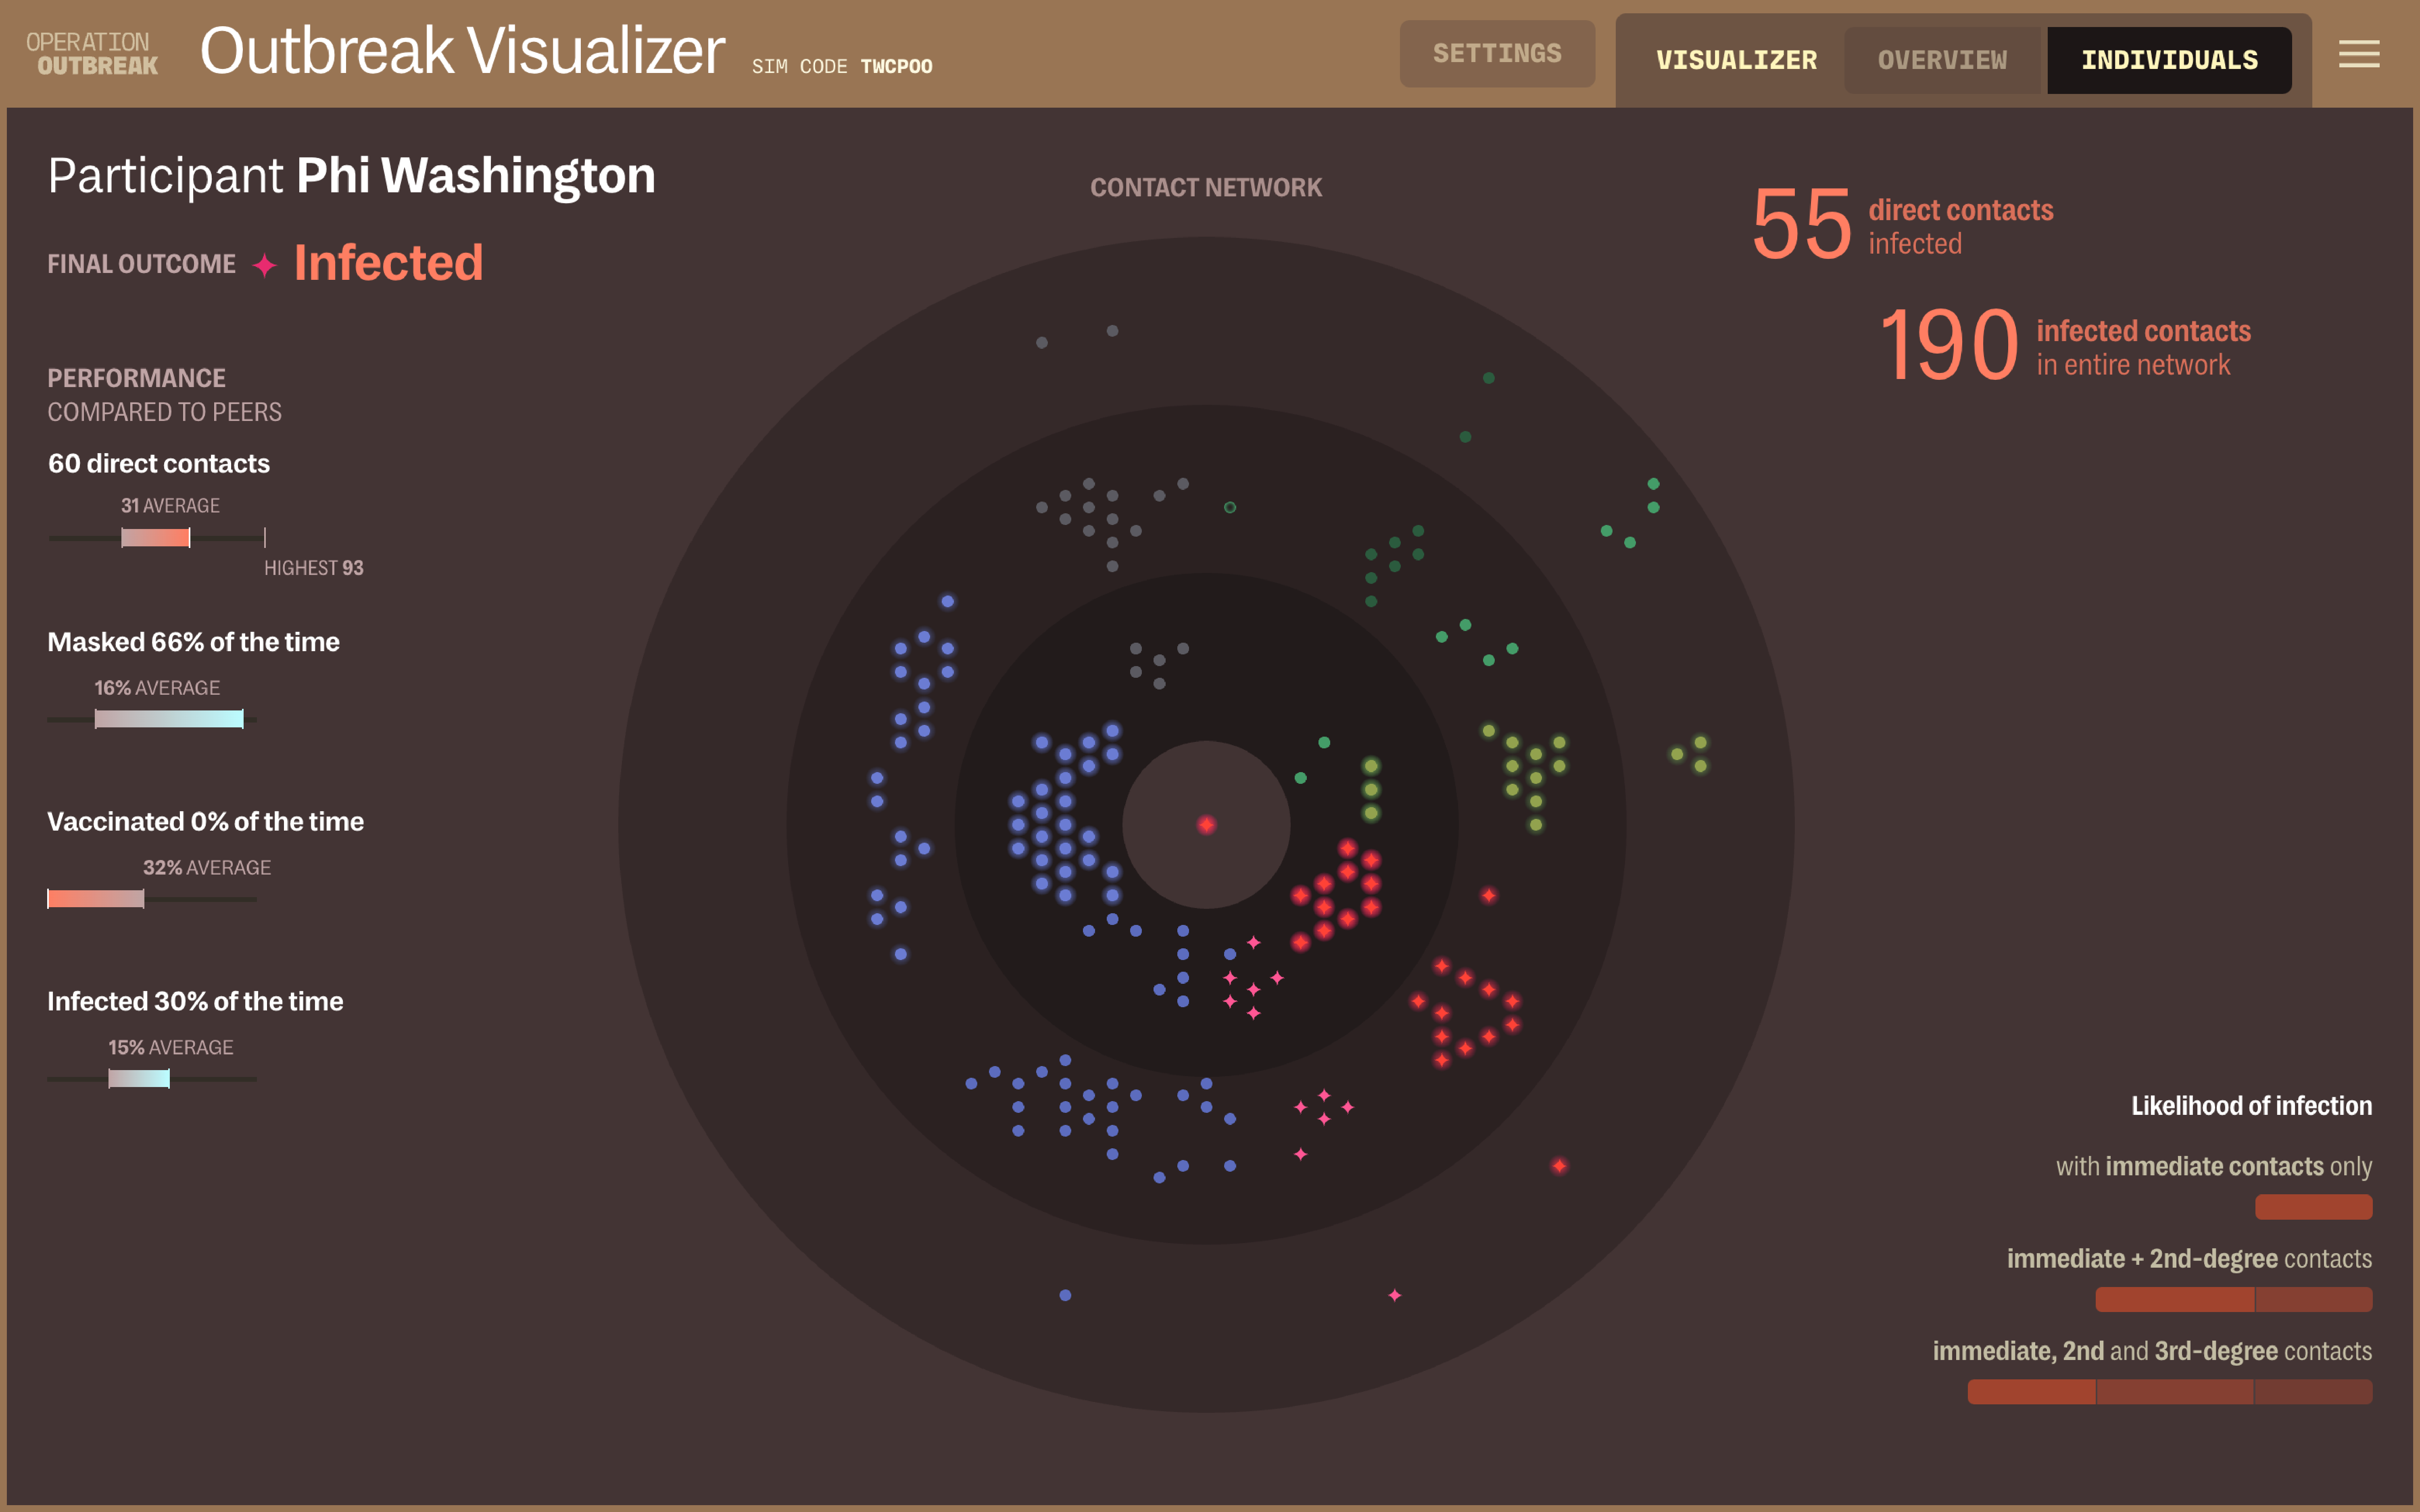 An Individual view in the Outbreak Visualizer, showing a detailed look at one participant, named Phi Washington. Concentric rings around the participants show their contact network of immediate, second-degree, and third-degree contacts.